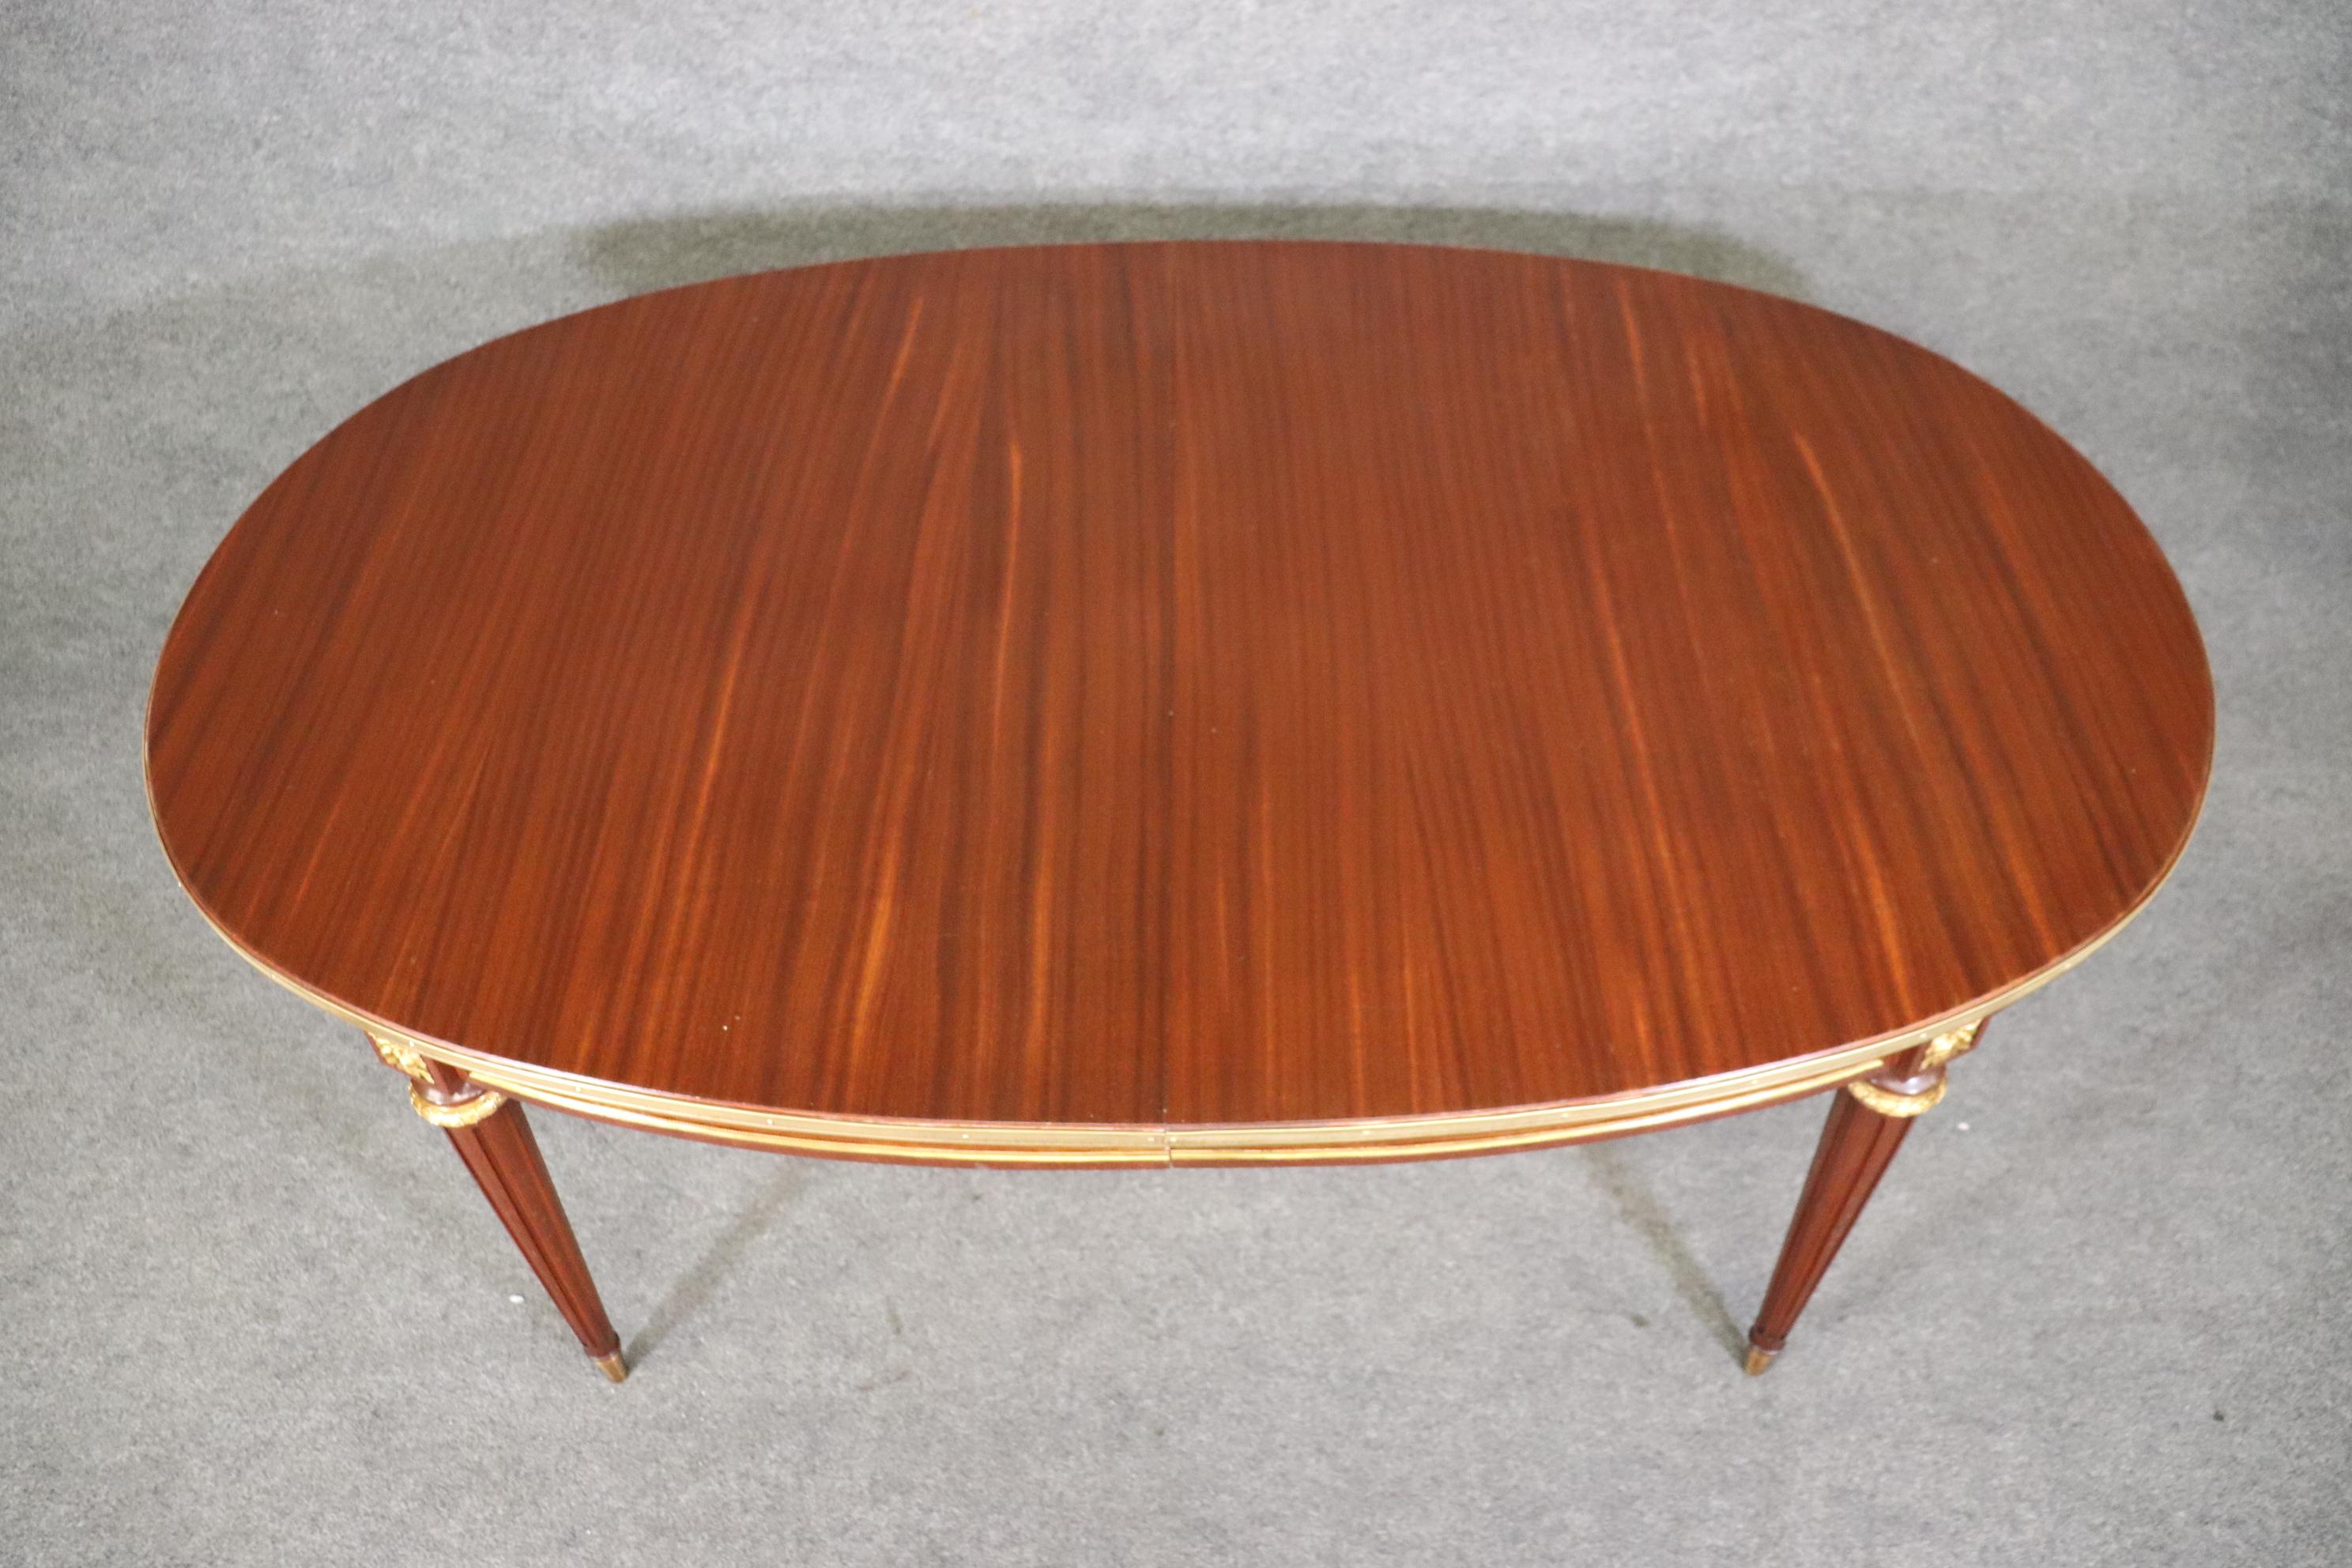 20th Century Maison Jansen Louis XVI Style Mahogany Dining Table With Two Leaves  For Sale